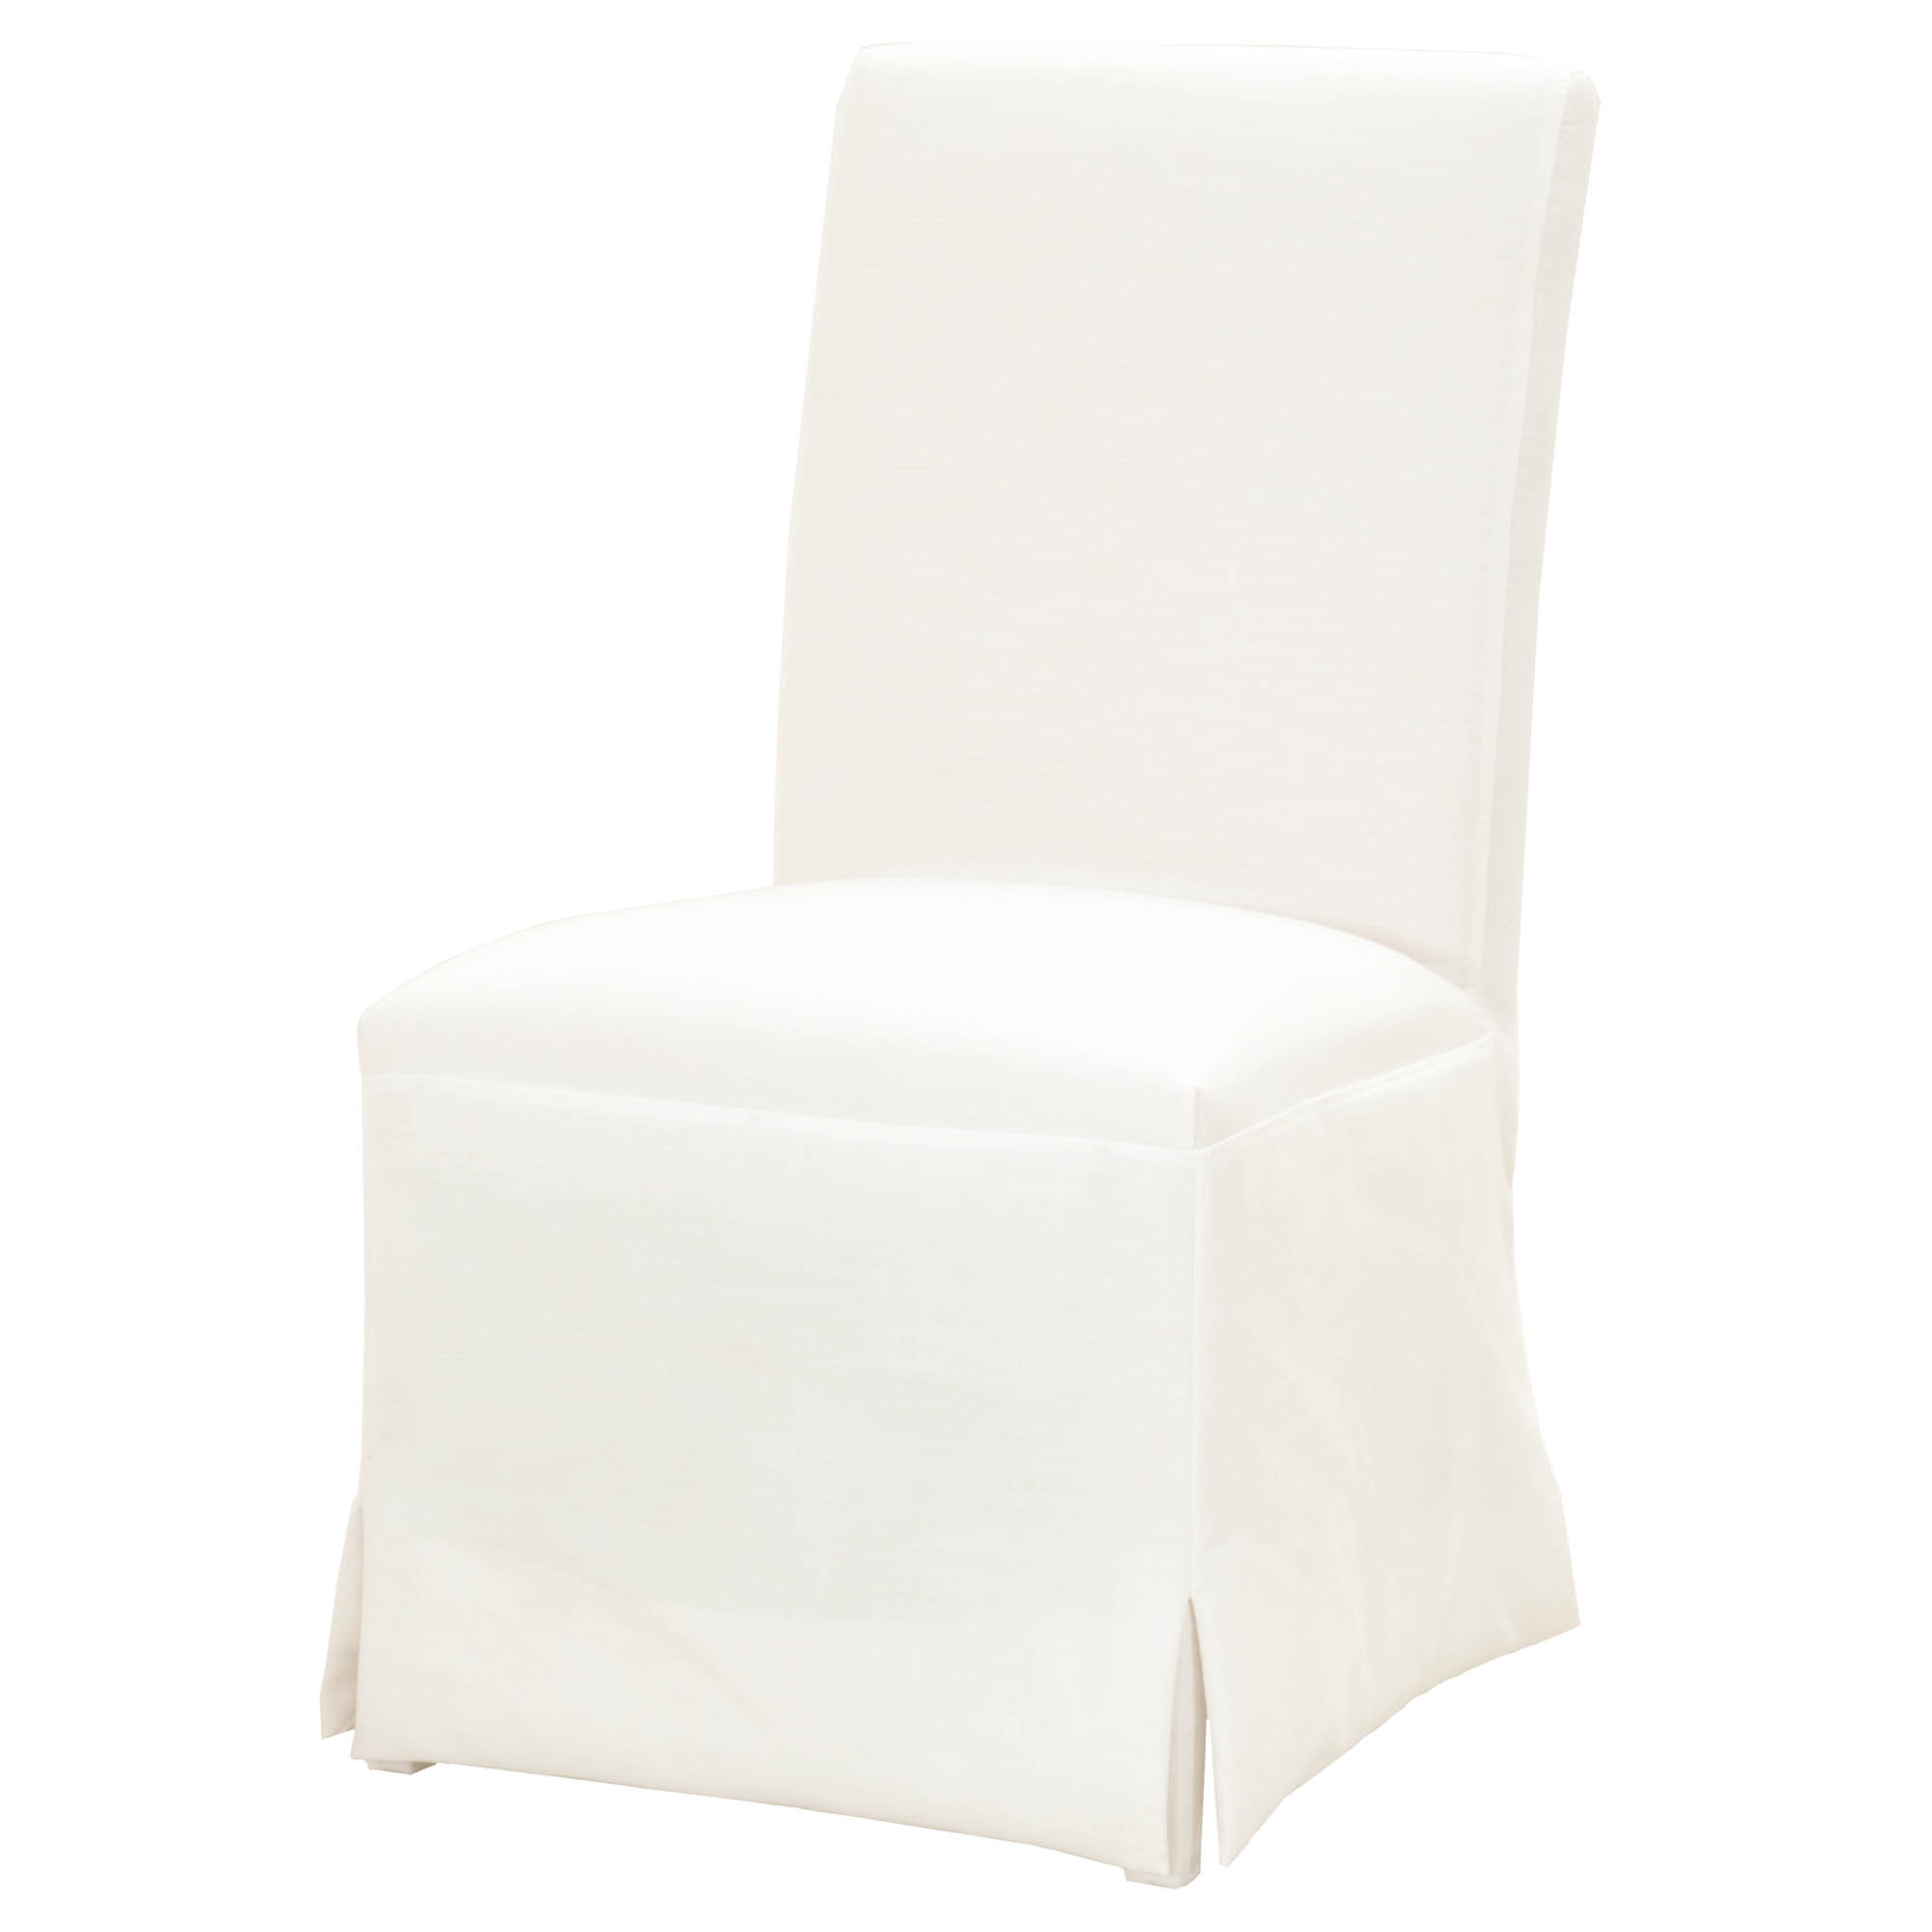 Levi Slipcover Dining Chair, Set of 2 - Image 1